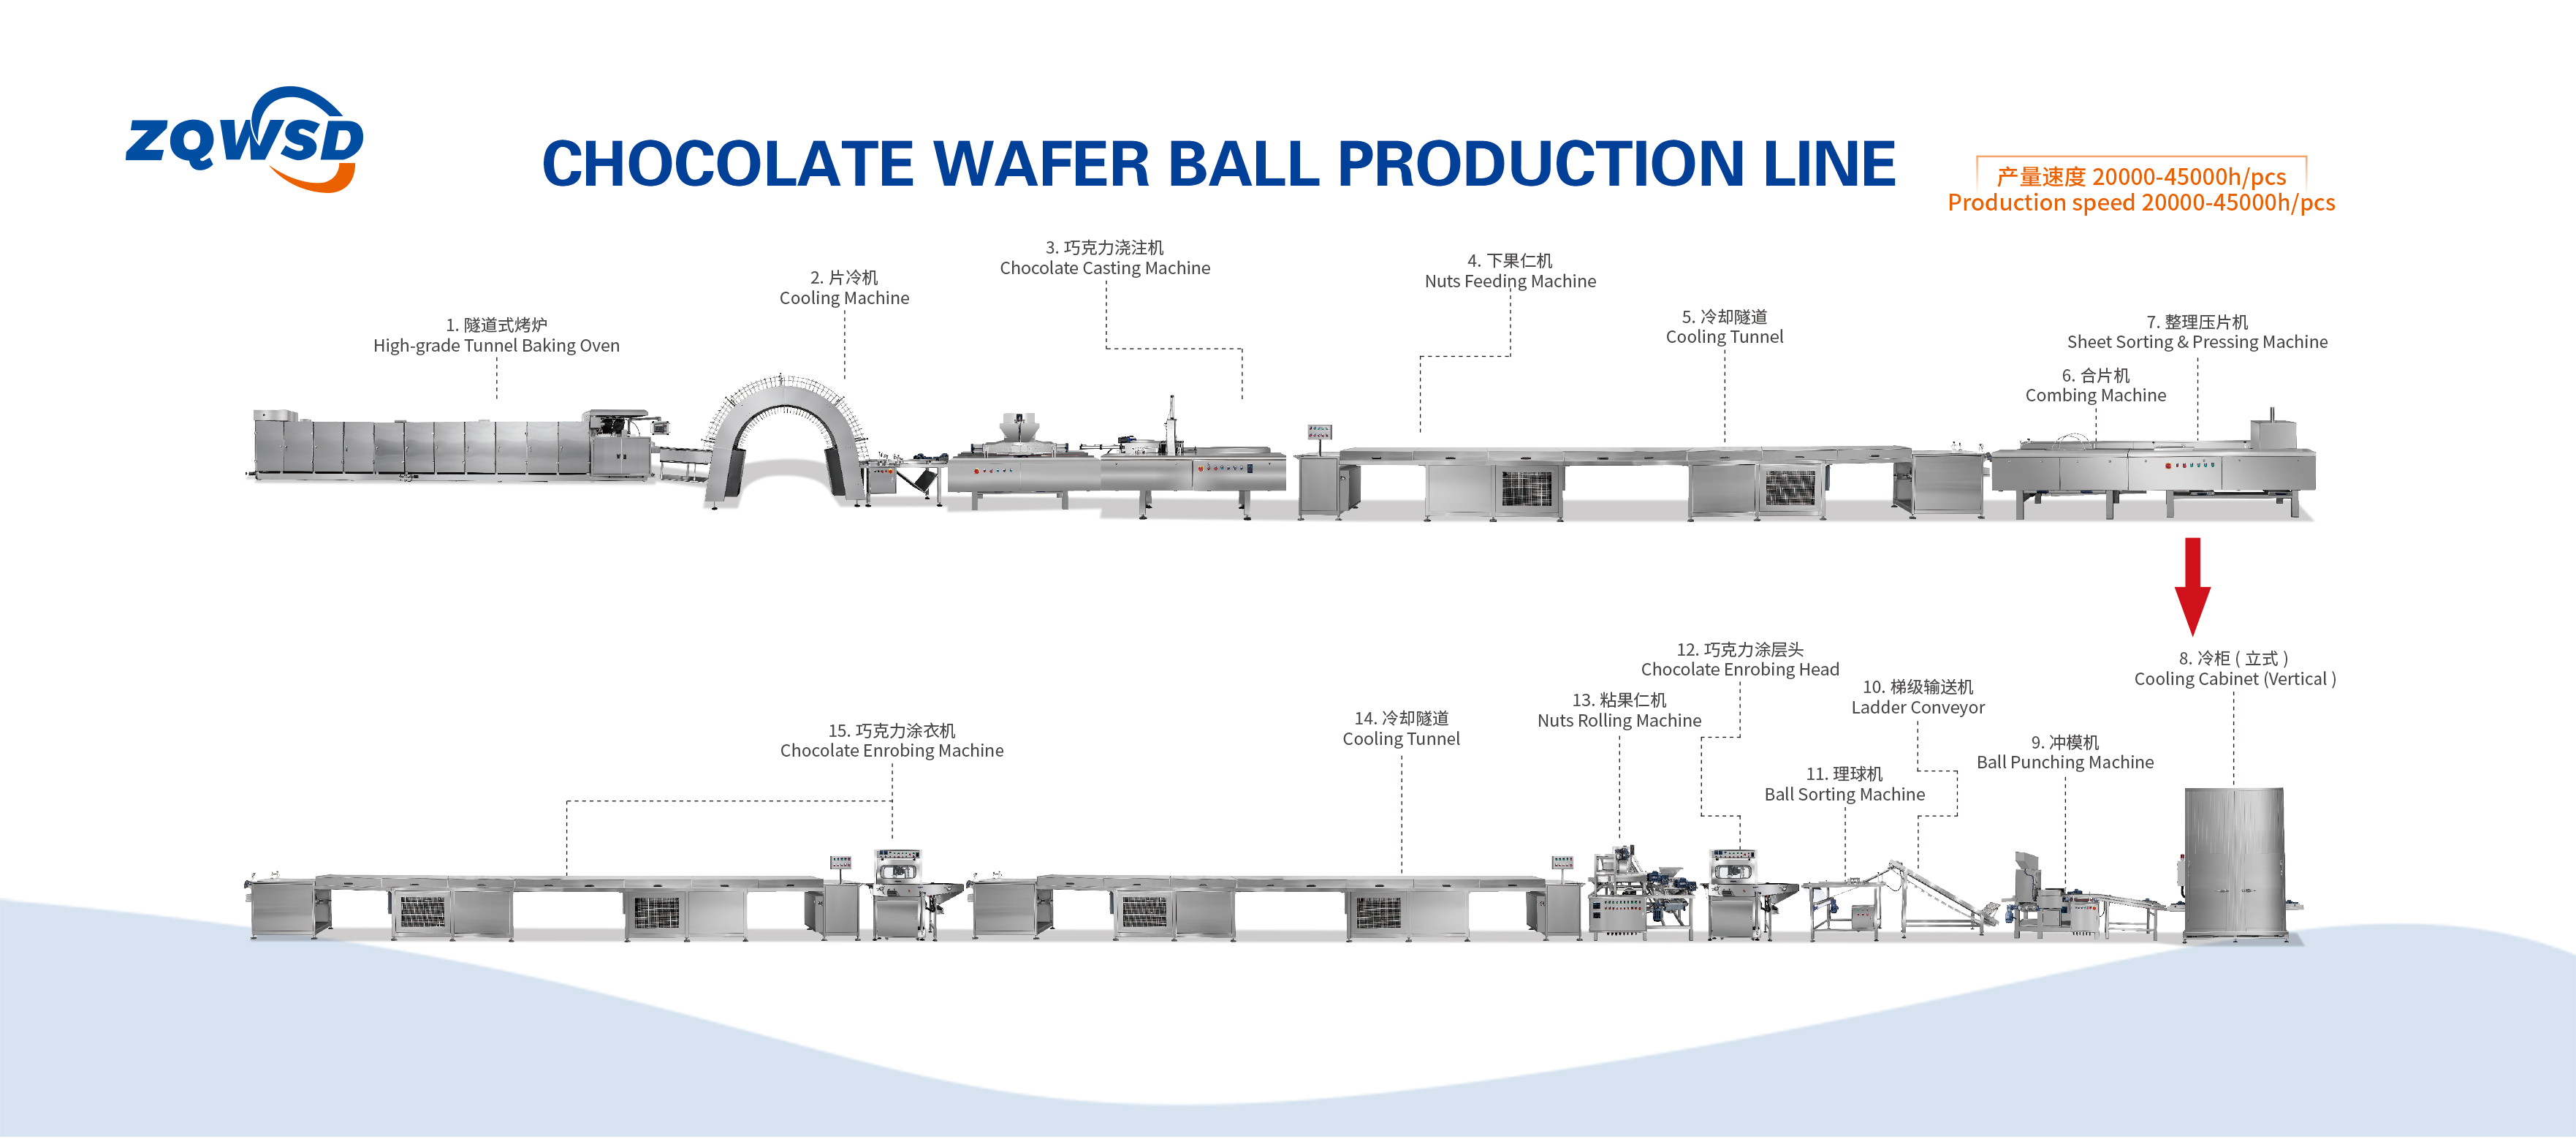 Chocolate wafer ball production line